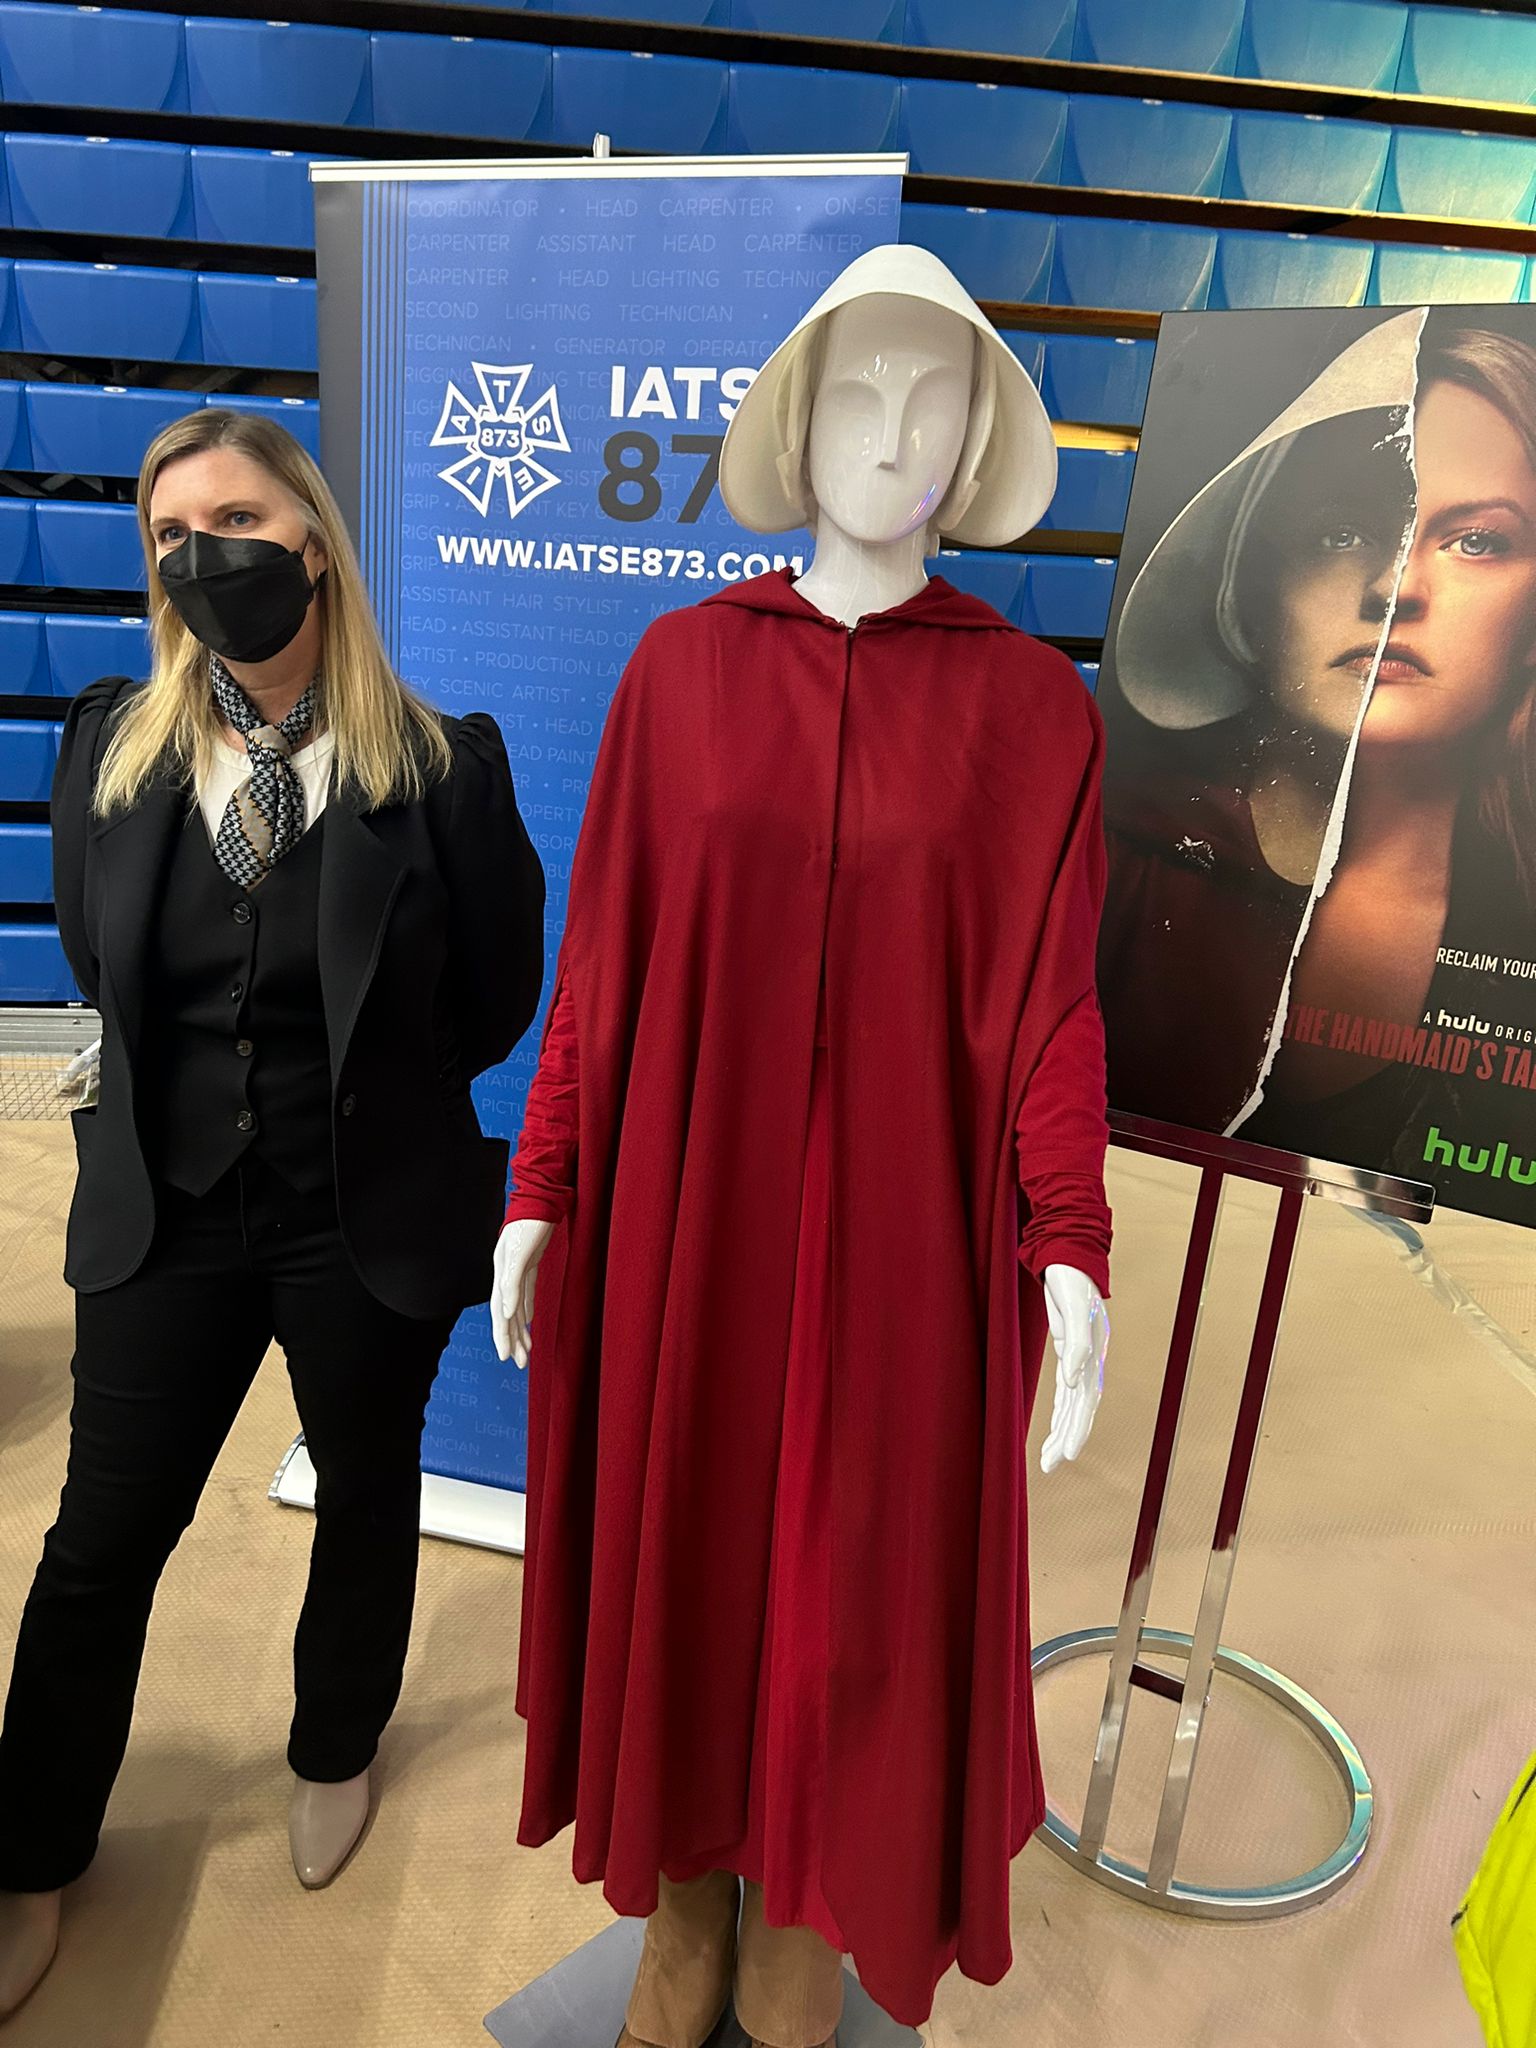 A mannequin wearing a red handmaids costume from The Handmaid's Tale.